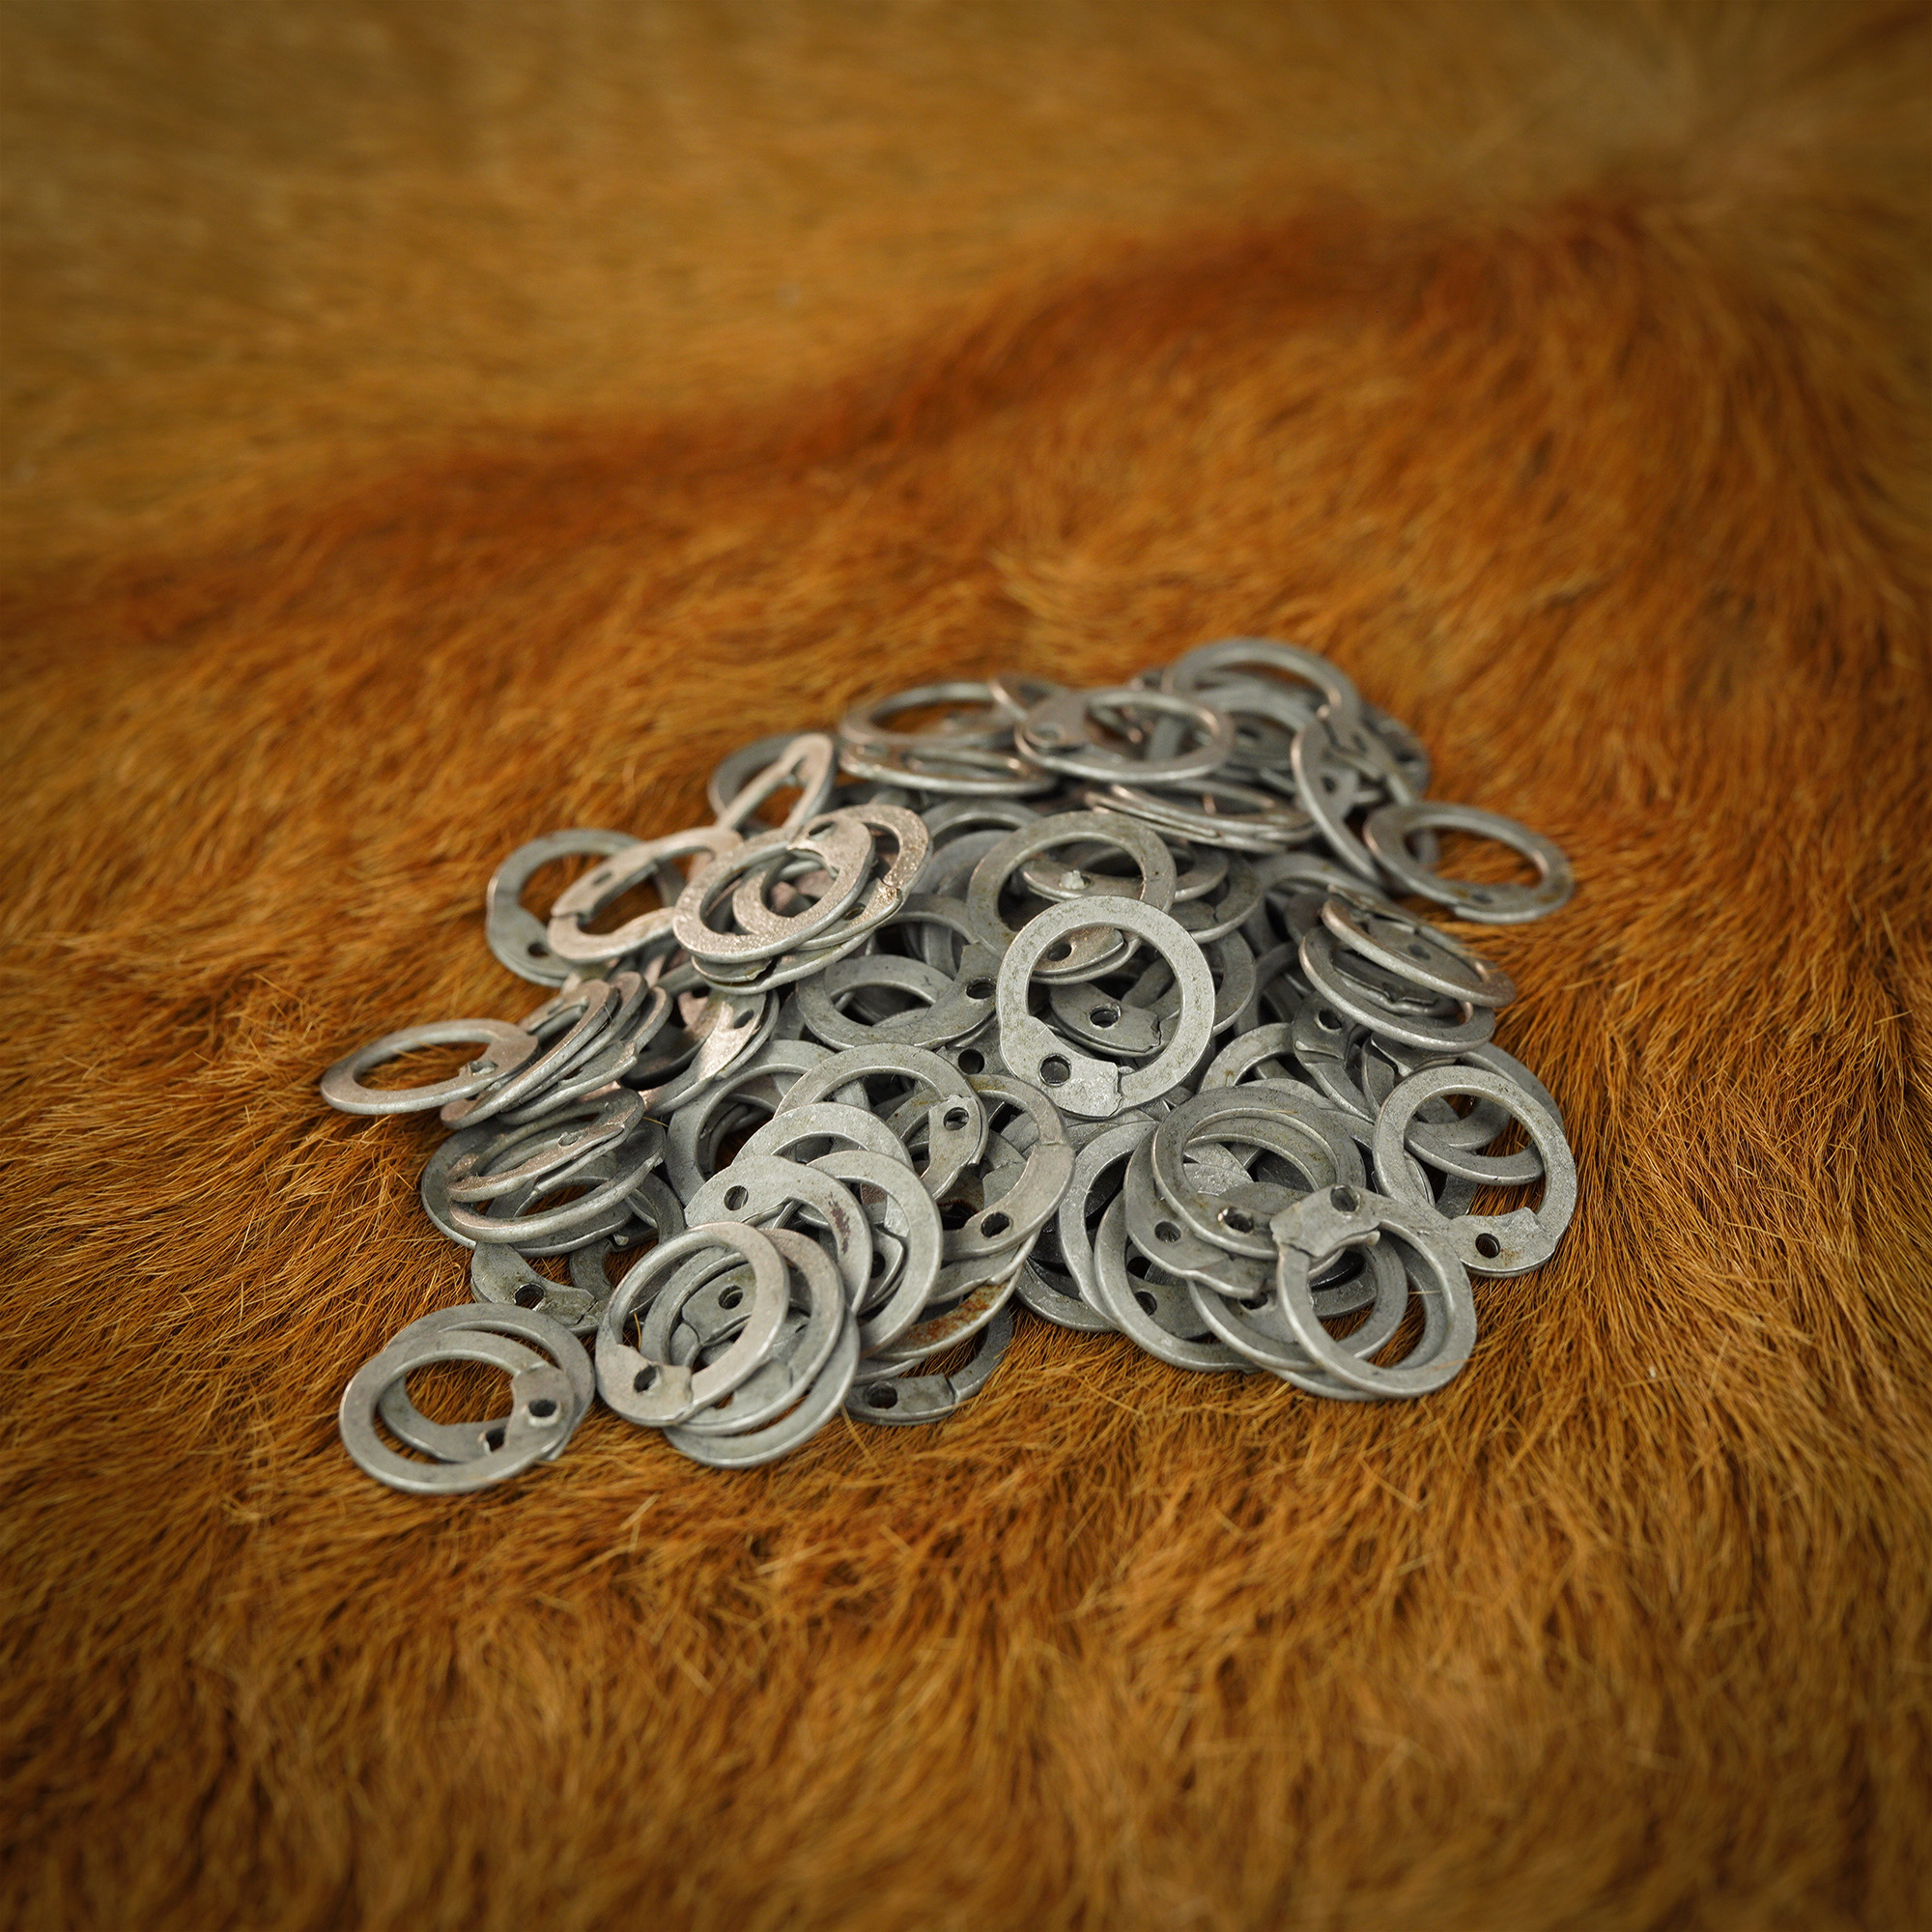 My Armor Store - Loose Chainmail Rings - Flat Ring Wedge Riveted 9mm